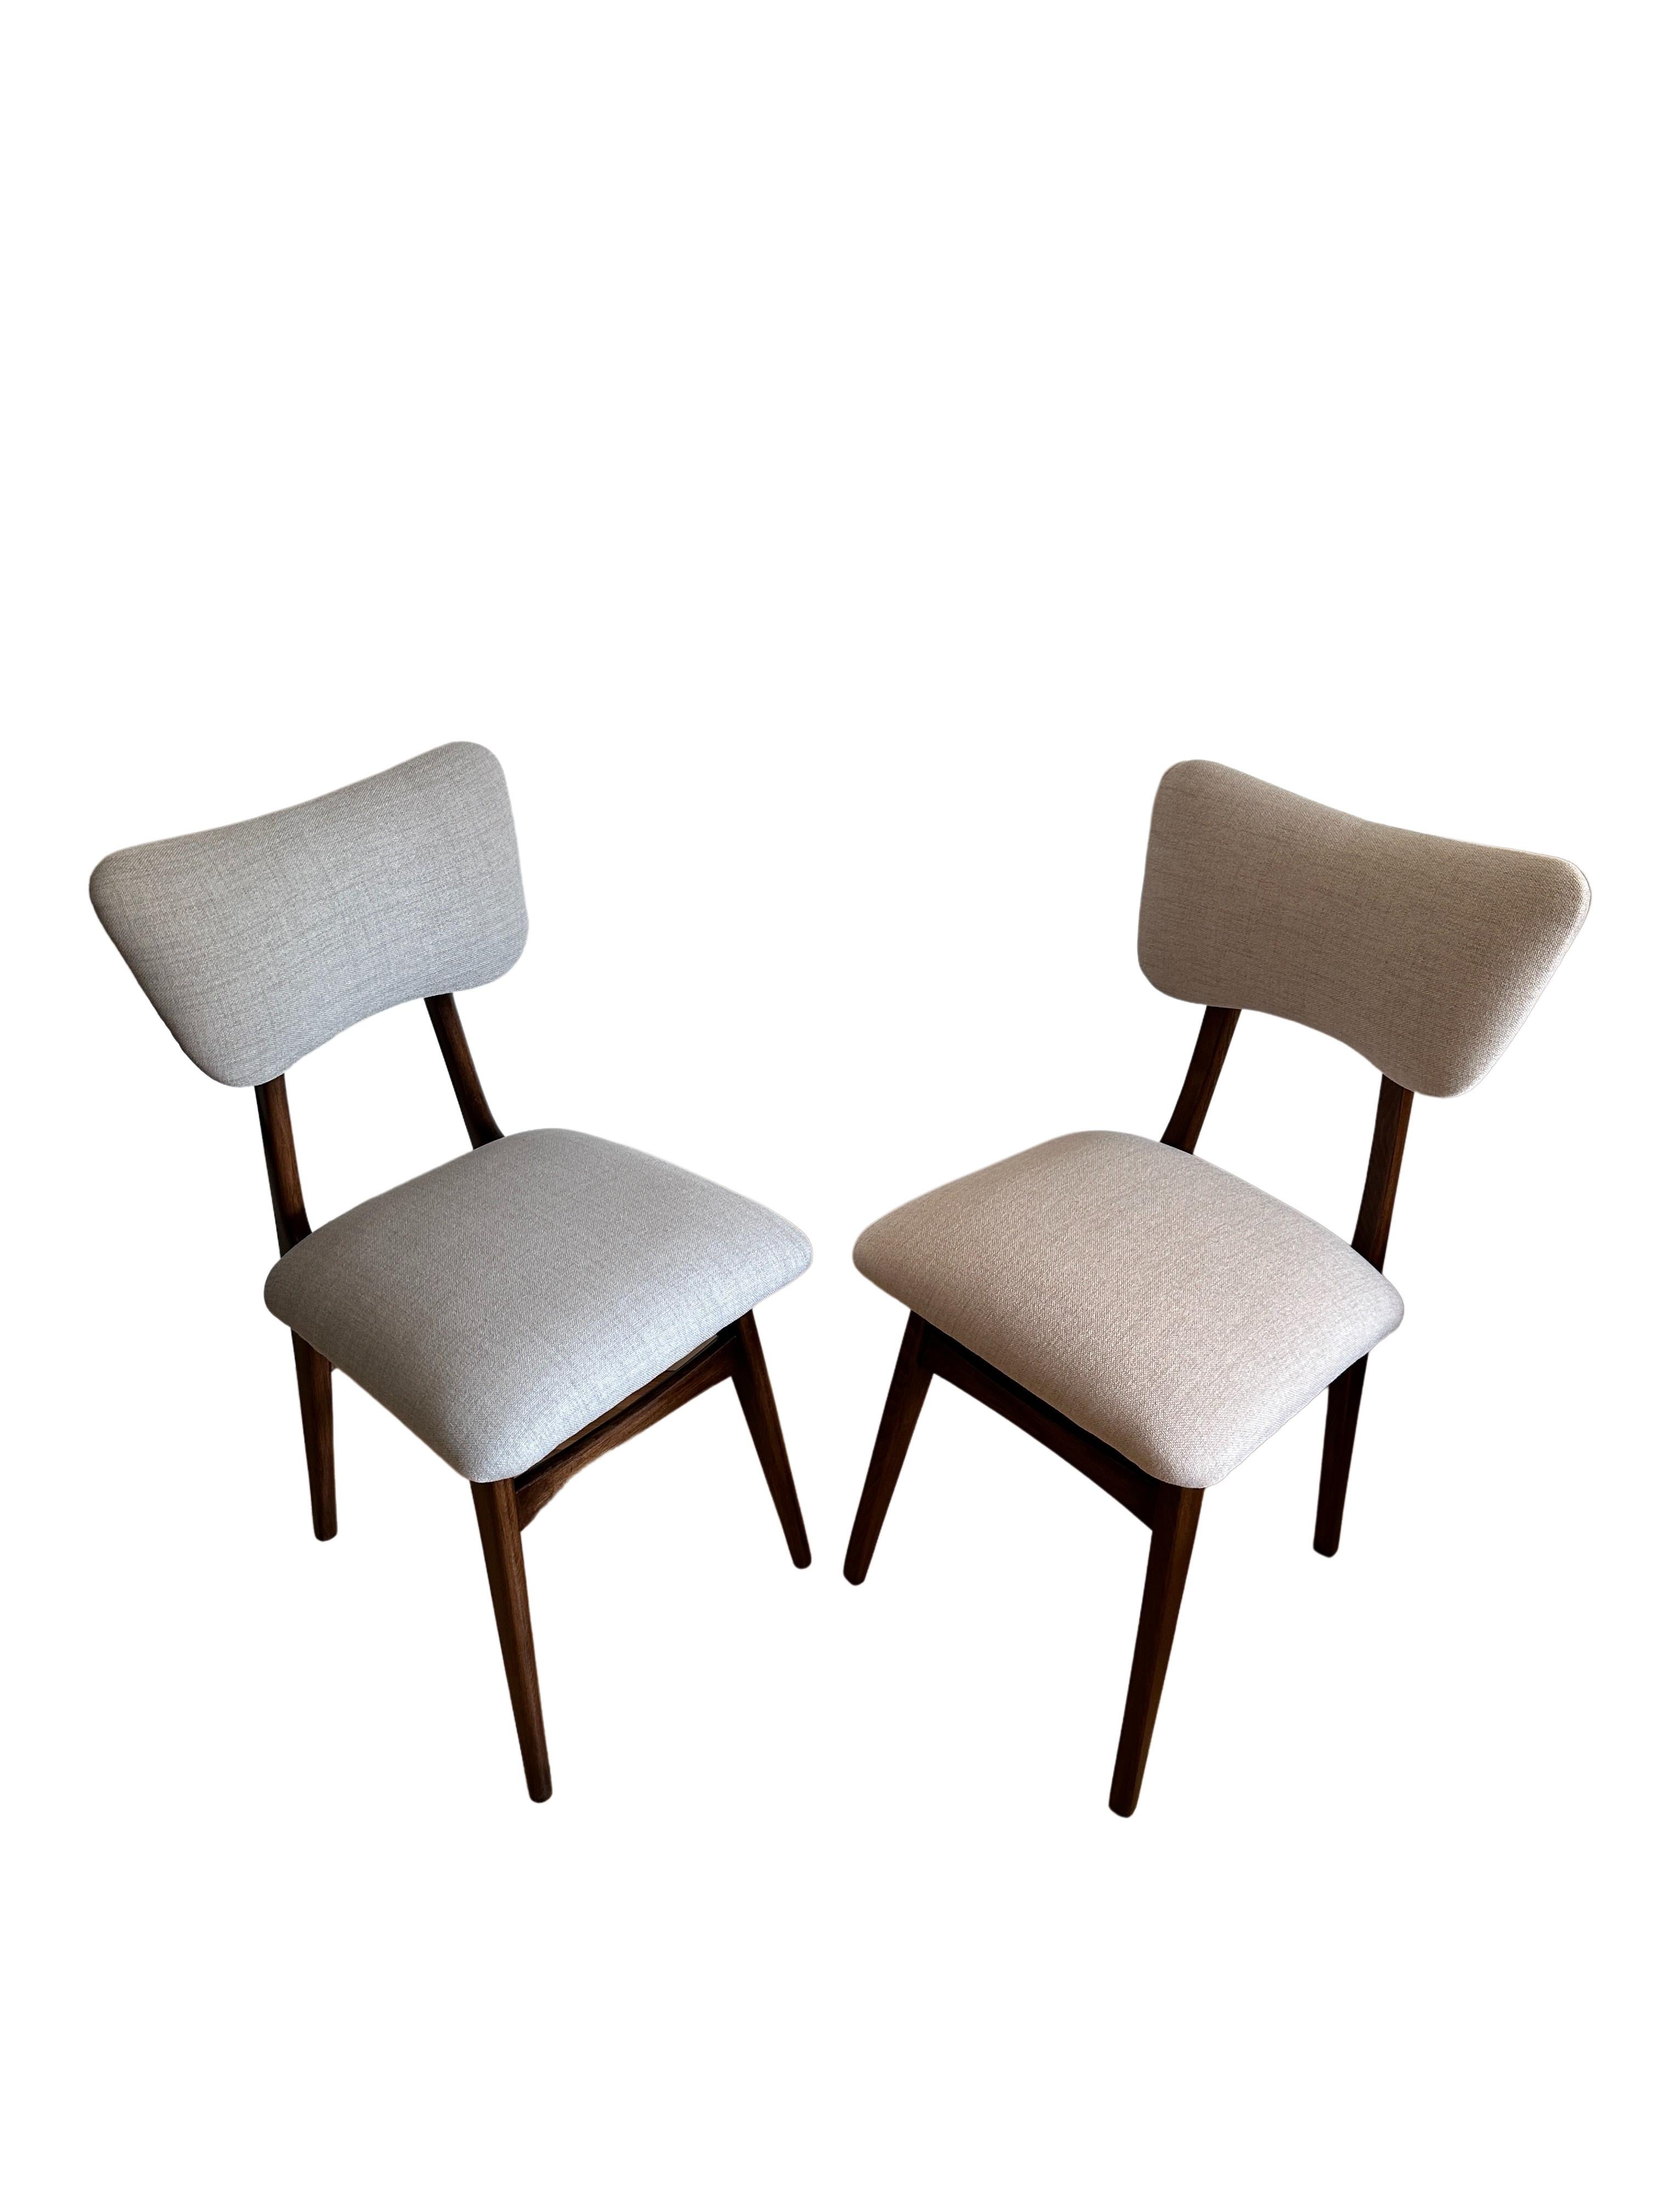 Mid-Century Modern Set of 6 Midcentury Beige and Grey Dining Chairs, Europe, 1960s For Sale